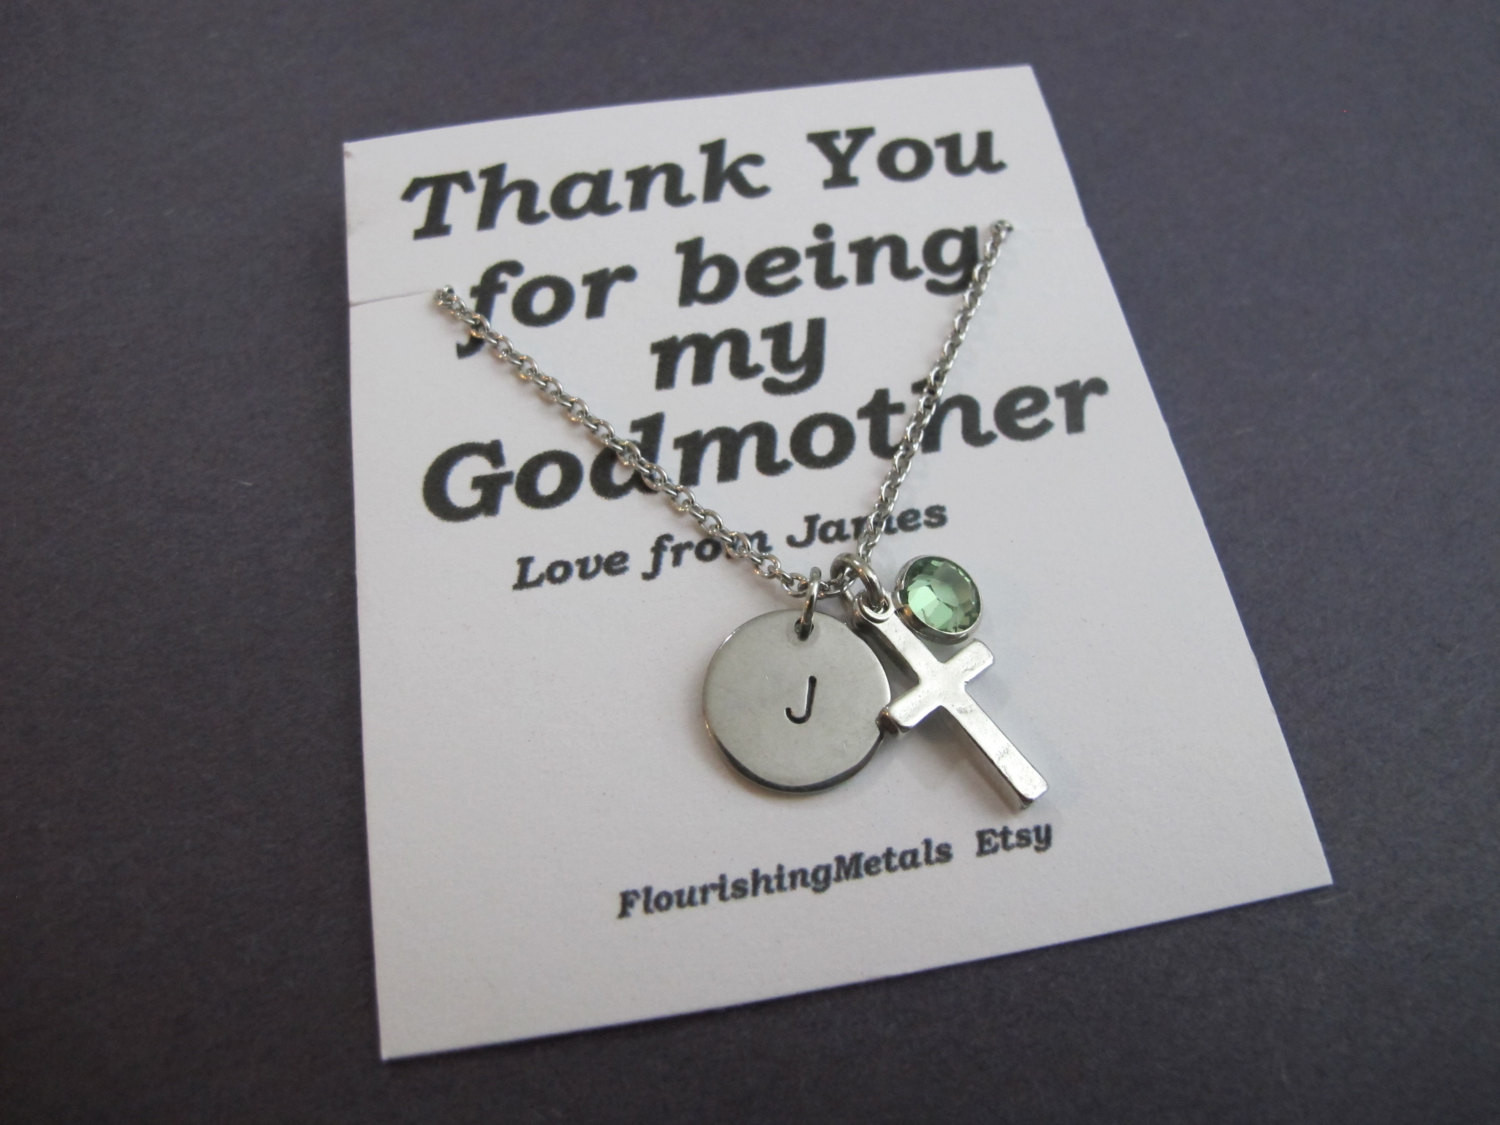 Baptism Gift Ideas From Godmother
 Godmother Gift Gift for Godmother Godmother necklace